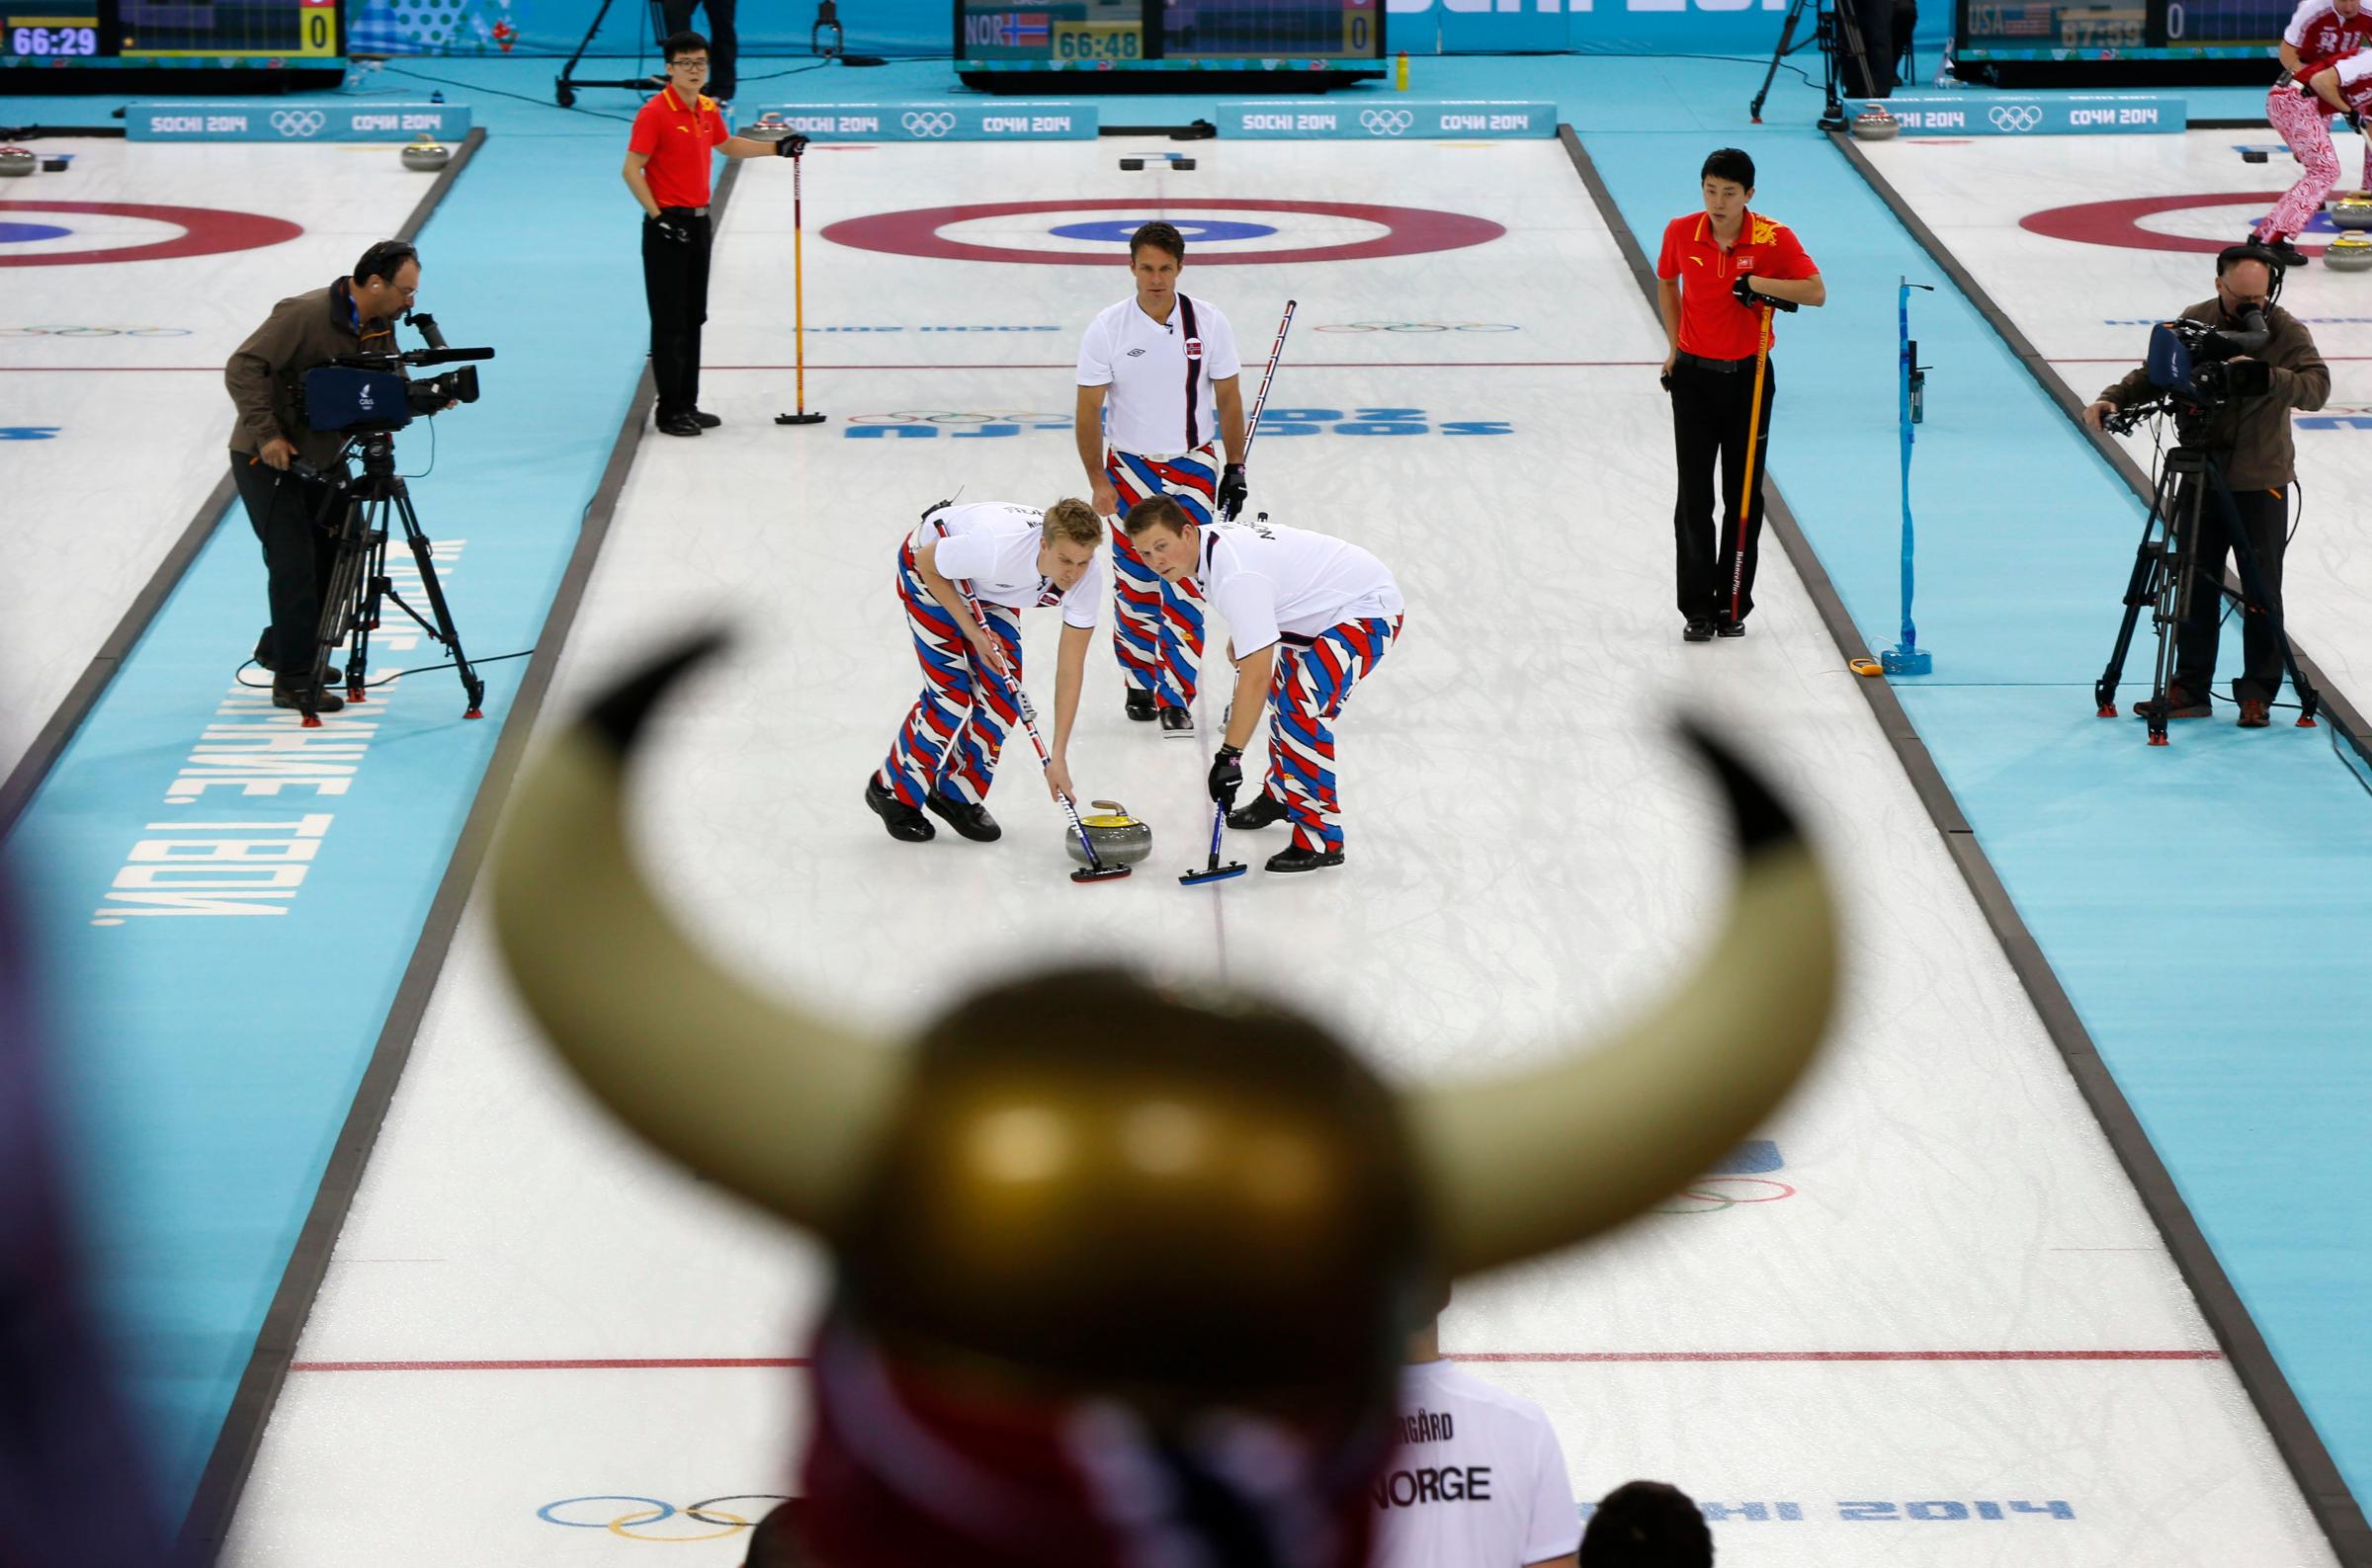 Norwegian curling fan Rune Eikeland, wearing viking horns, watches his countrymen Haavard Vad Petersson, left, and Christoffer Svae sweep in front of a rock delivered by skip Thomas Ulsrud during the men's curling competition against China.